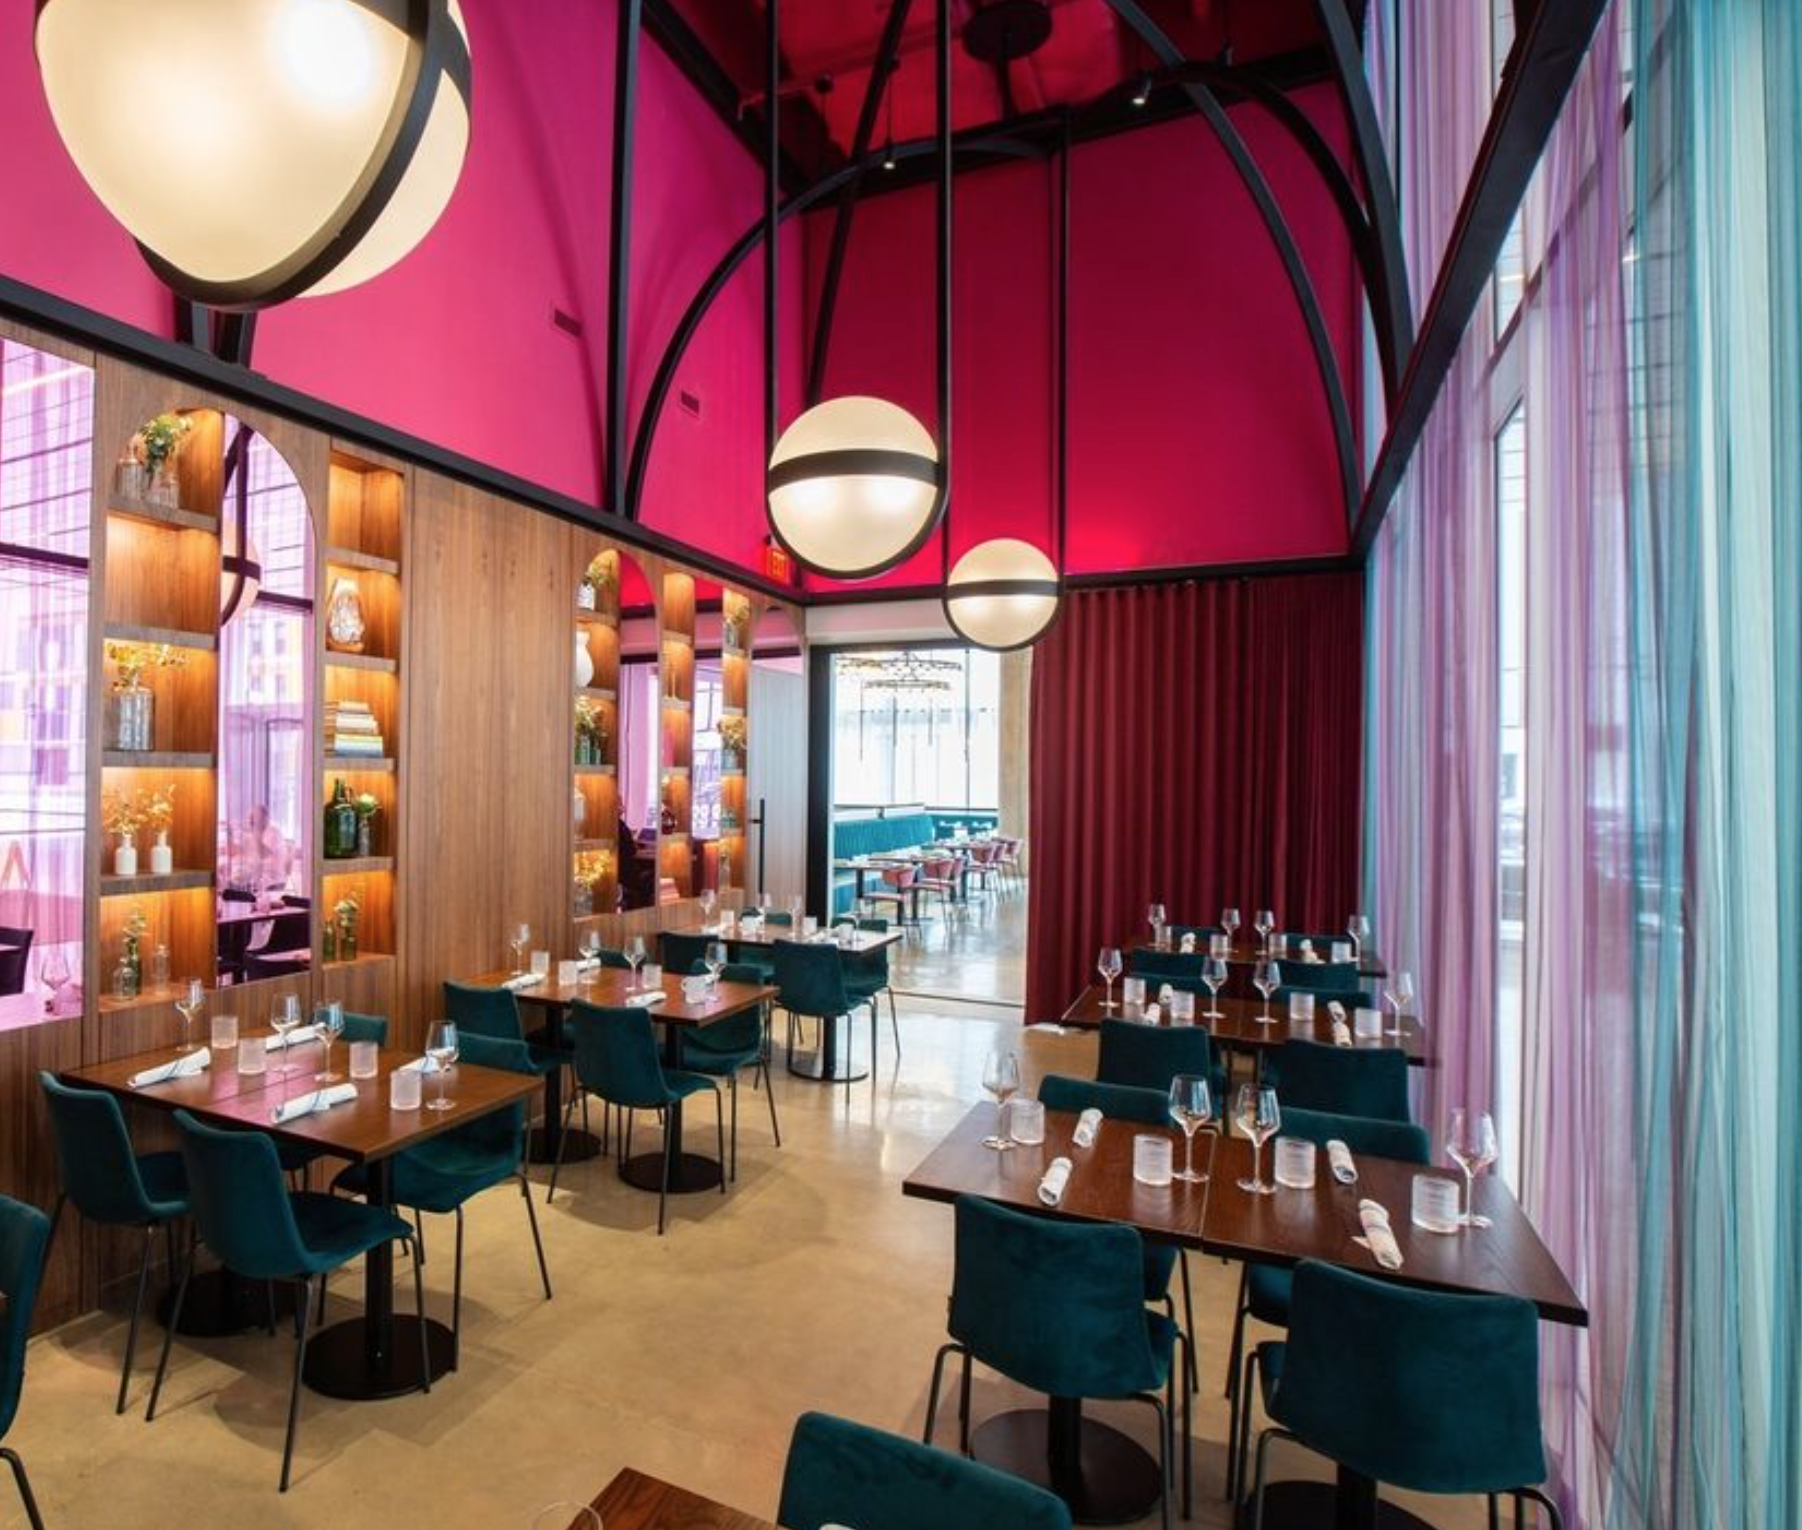 A photo of one of the rooms in Common Bond Brasserie in the Theater District in Houston, TX. The architecture is very modern with pops of bright pink, purple and blue.